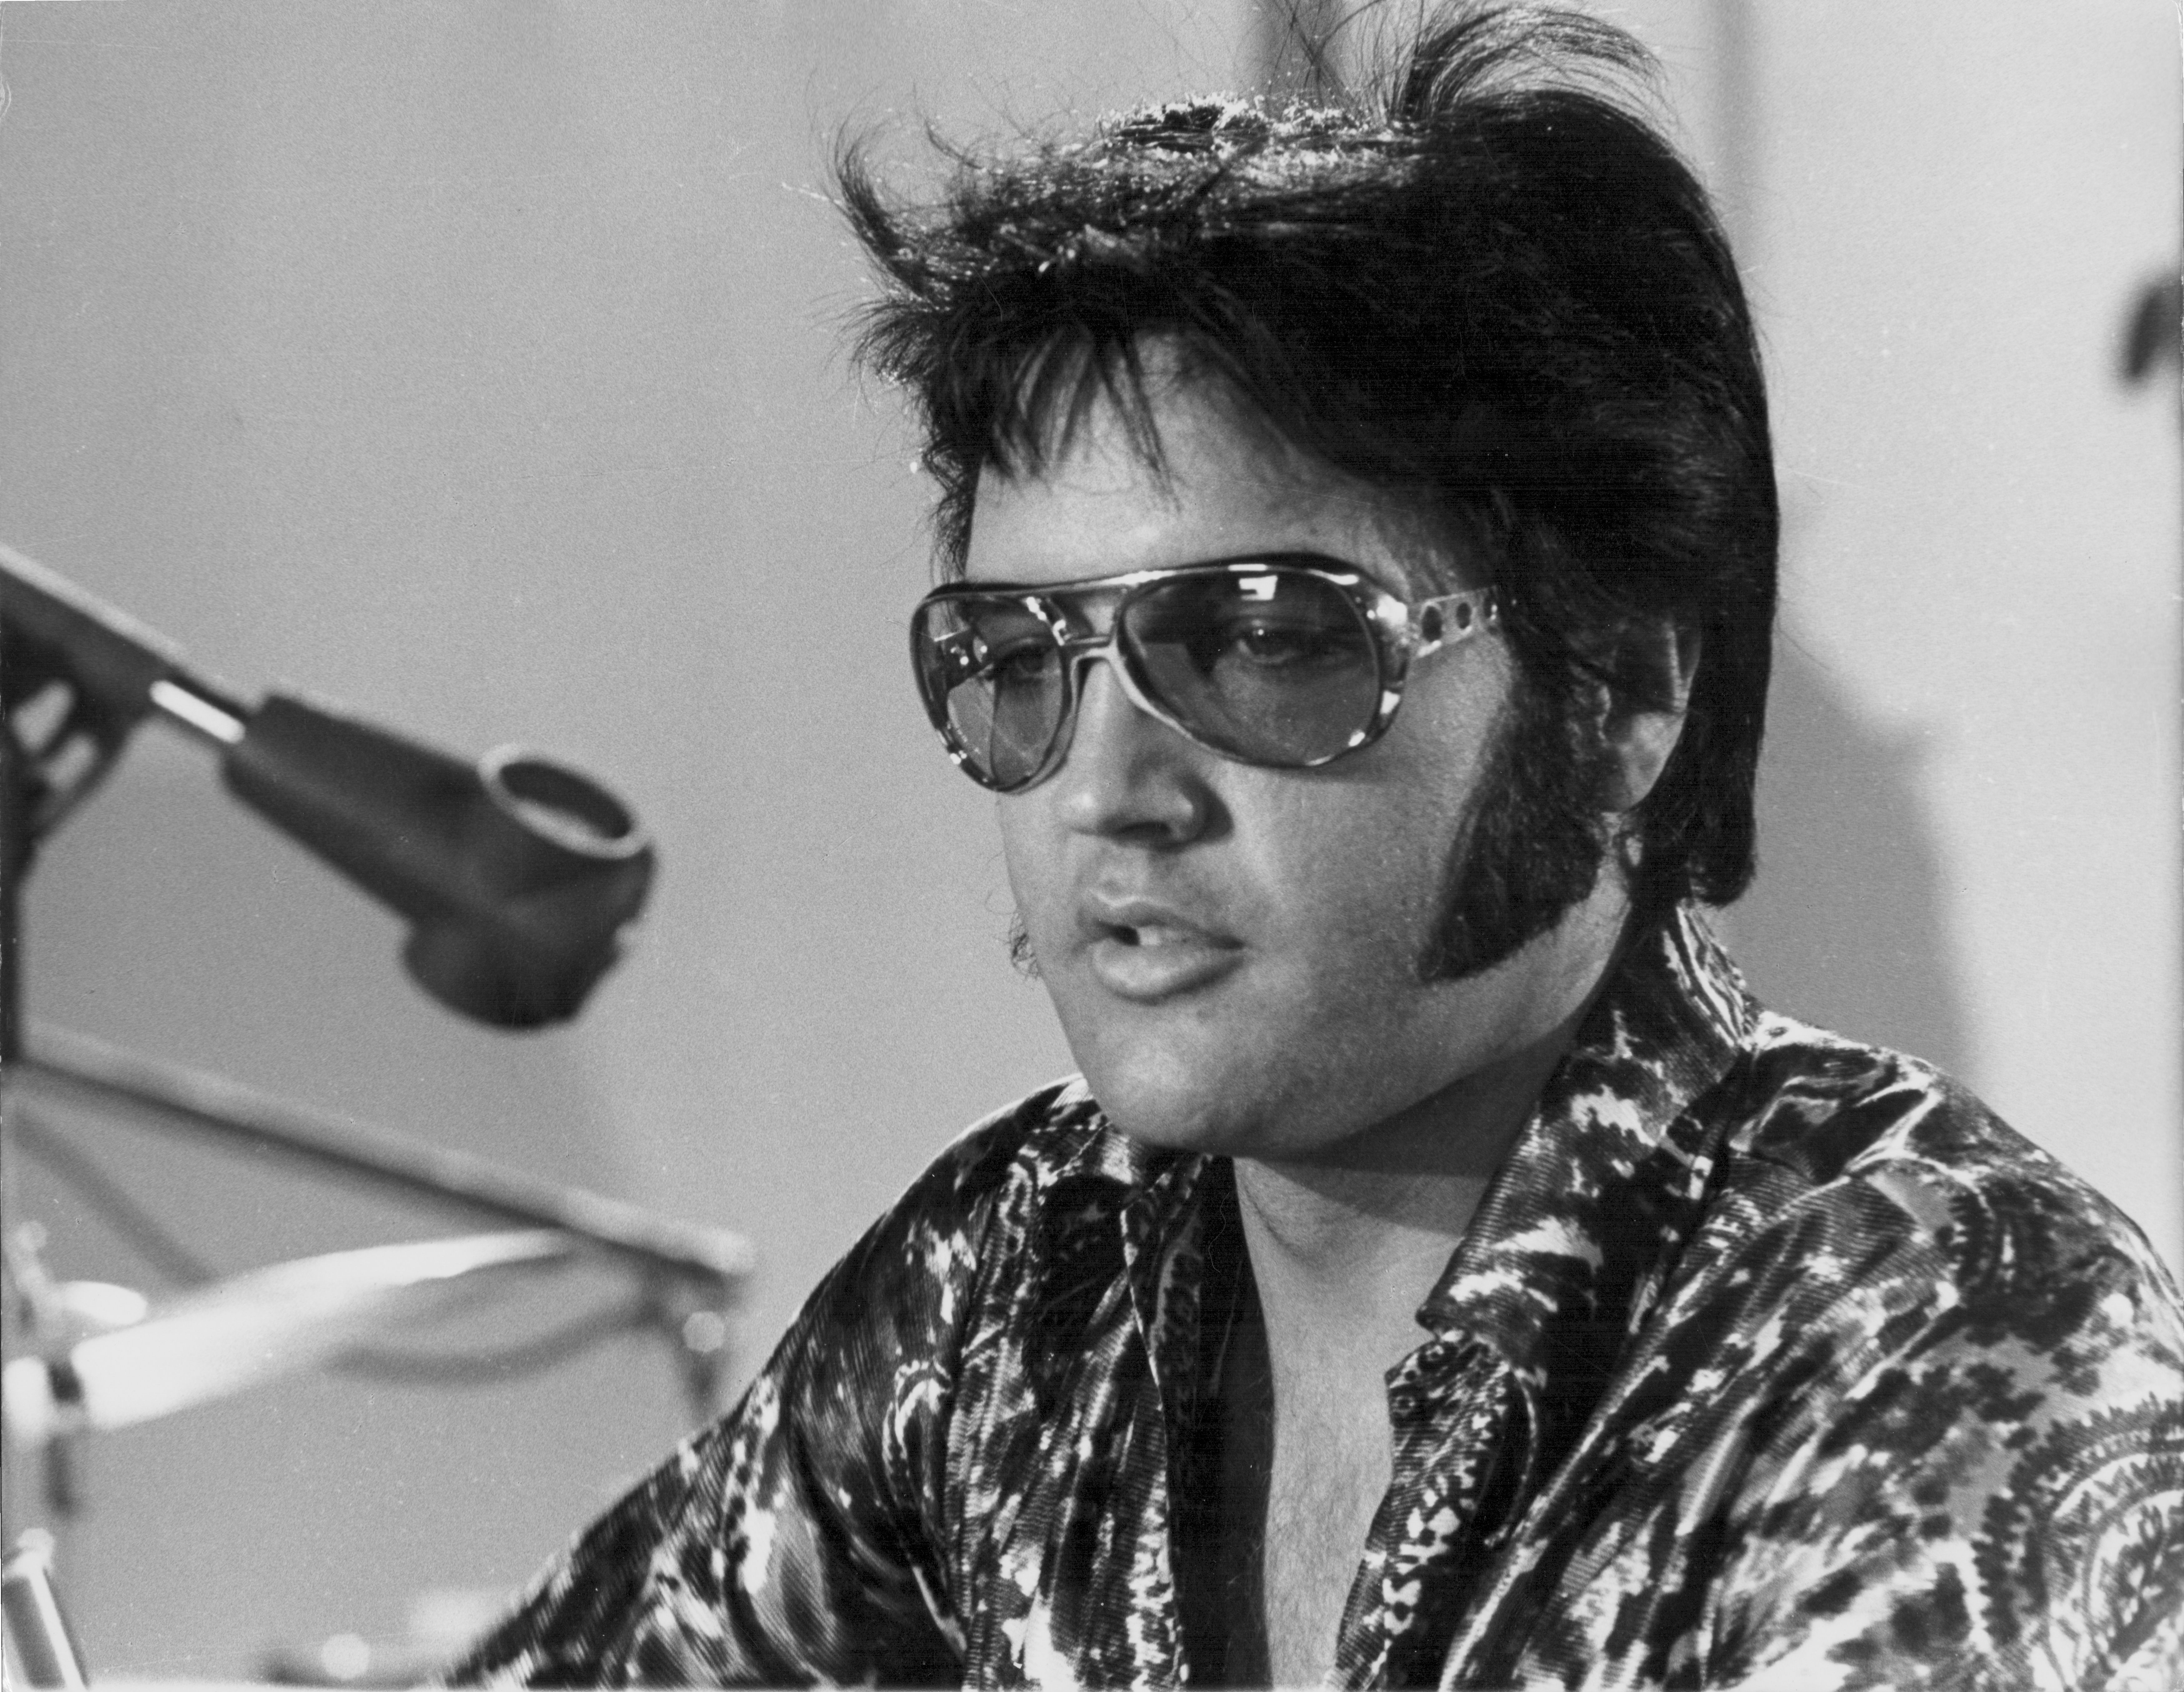 Elvis Presley in the documentary film 'Elvis; That's The Way It Is' in 1970 | Source: Getty Images